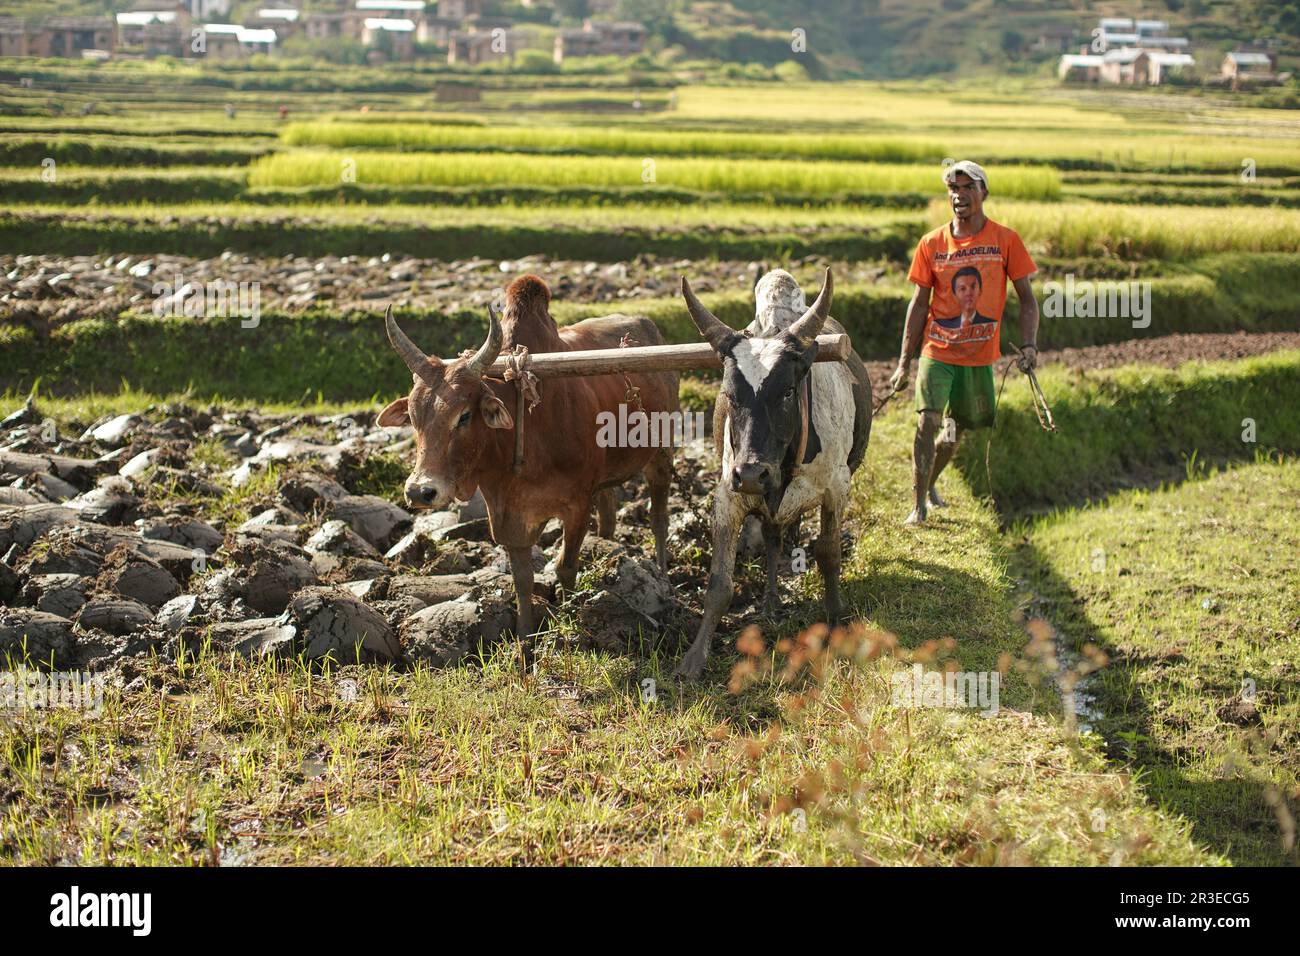 Manandoana, Madagascar - April 26, 2019: Unknown Malagasy man working outdoor ploughing field on sunny day. Two zebu cattle in front of him pulling si Stock Photo